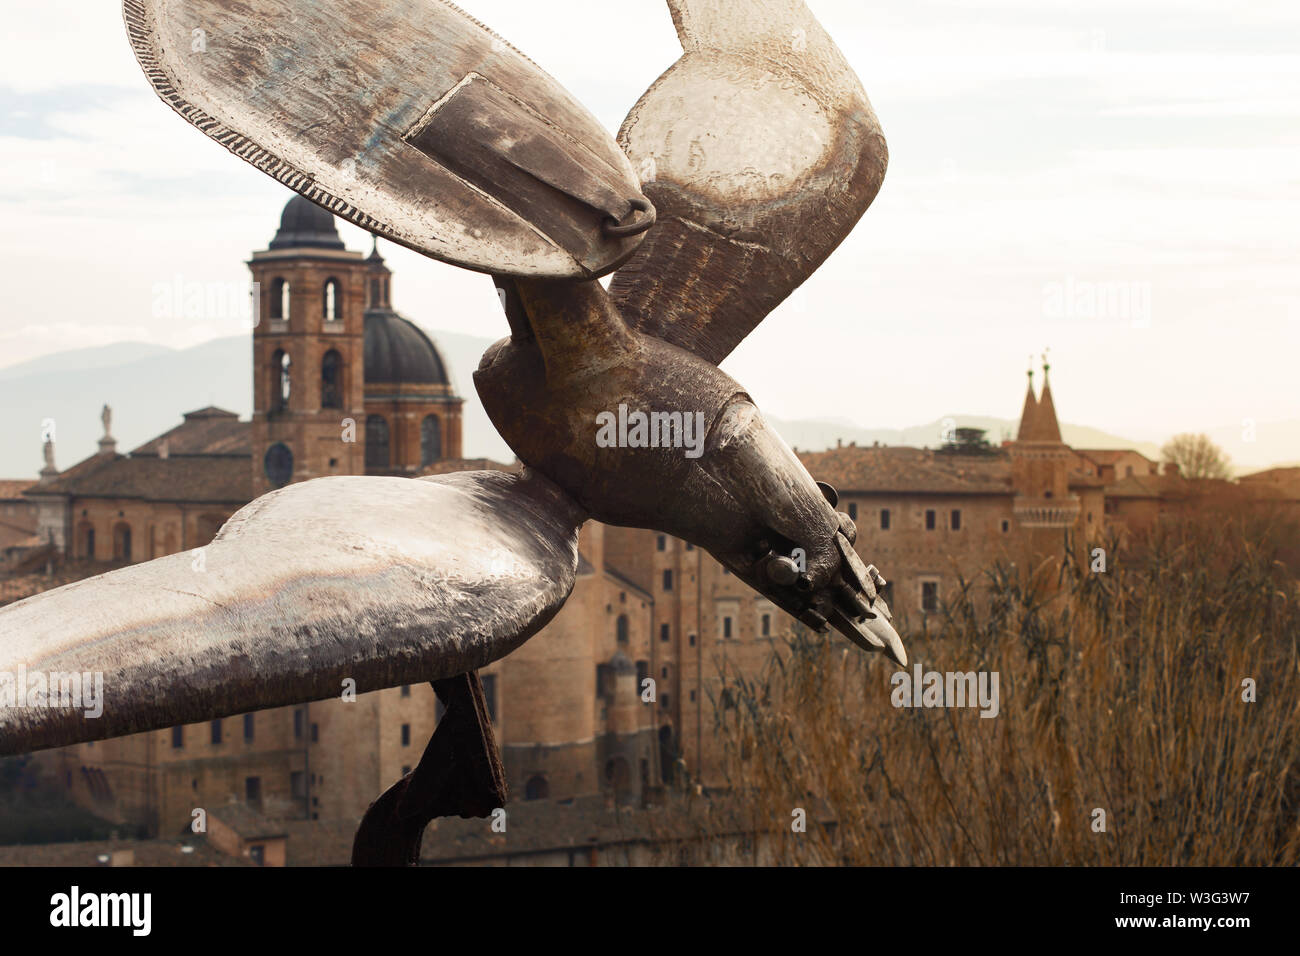 Iron eagle sculpture in Urbino, Marches, Italy. Ducal Palace with towers in background. View from the hill Stock Photo